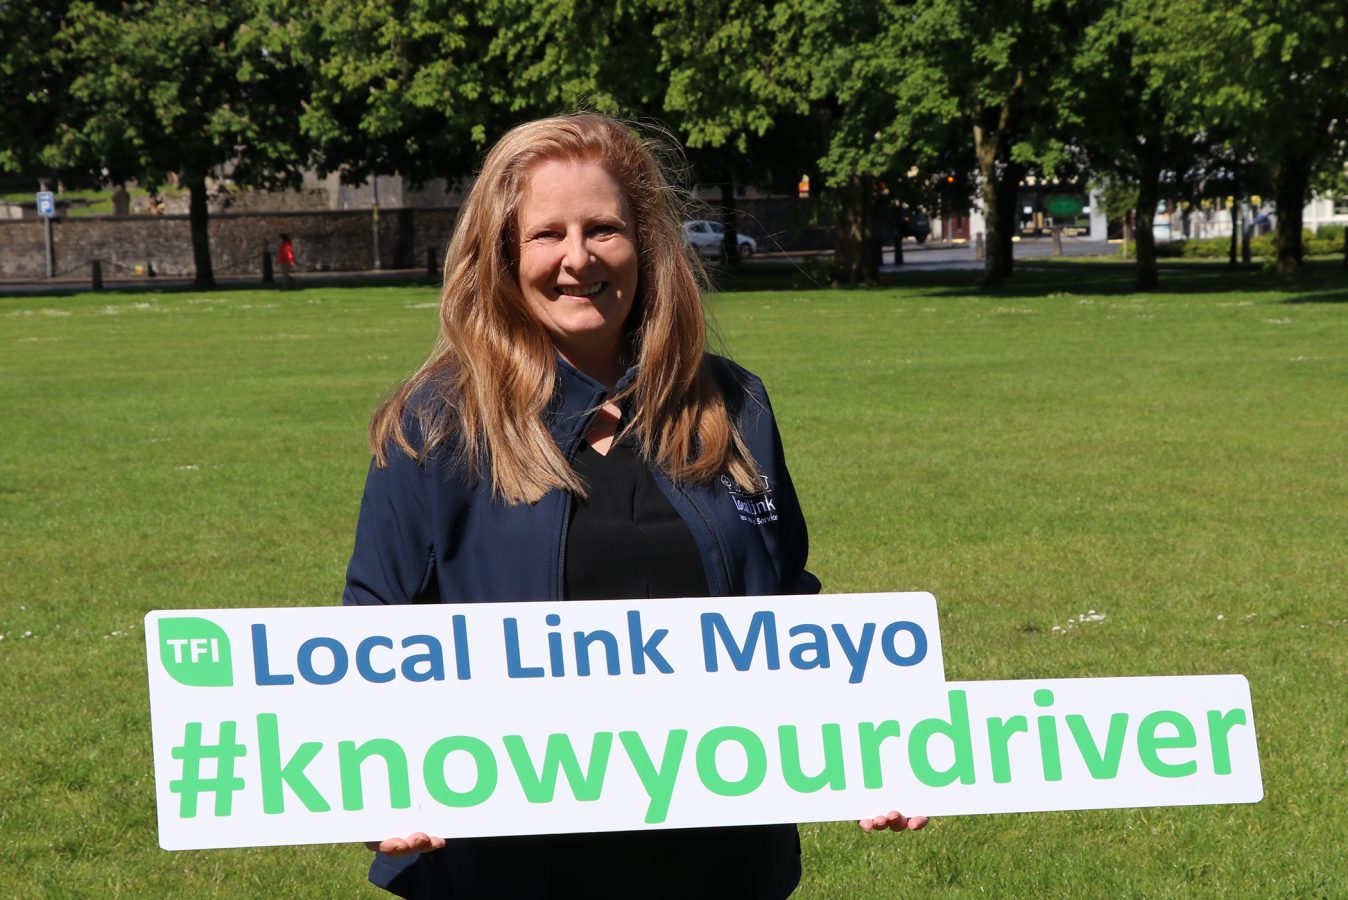 Angela Fahy (TFI Local Link Mayo), promoting "Know your driver" campaign